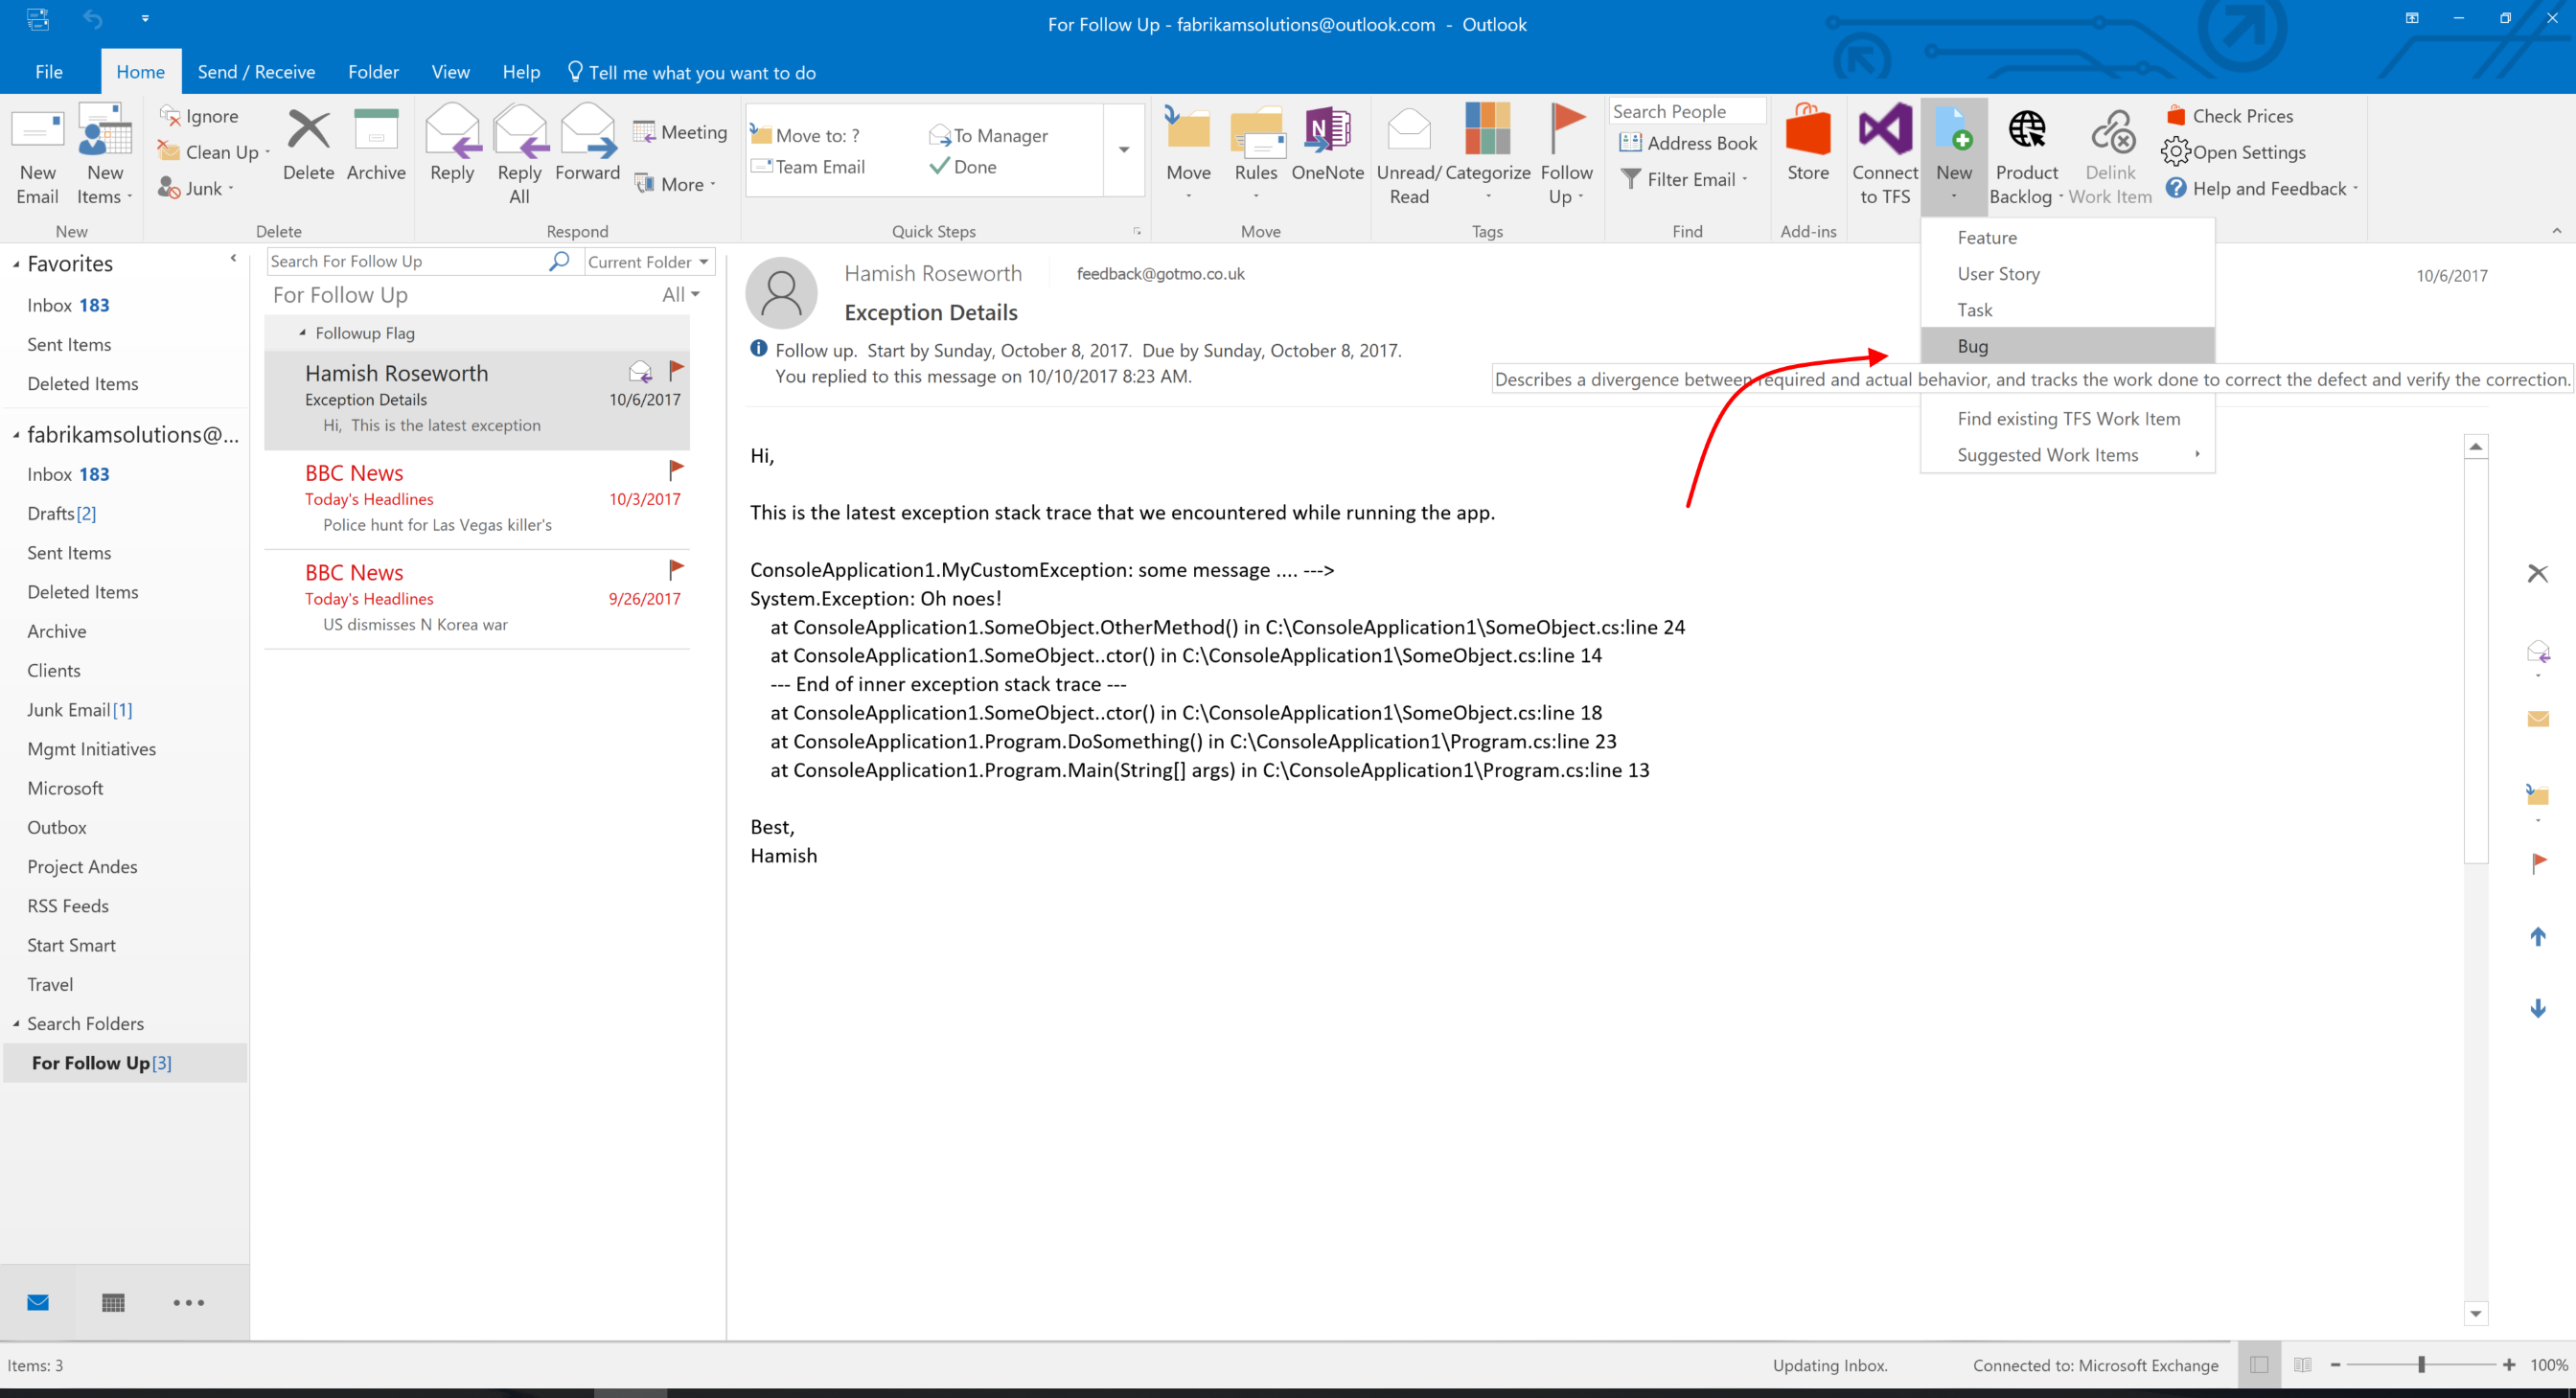 TMO Create work item from Outlook Email